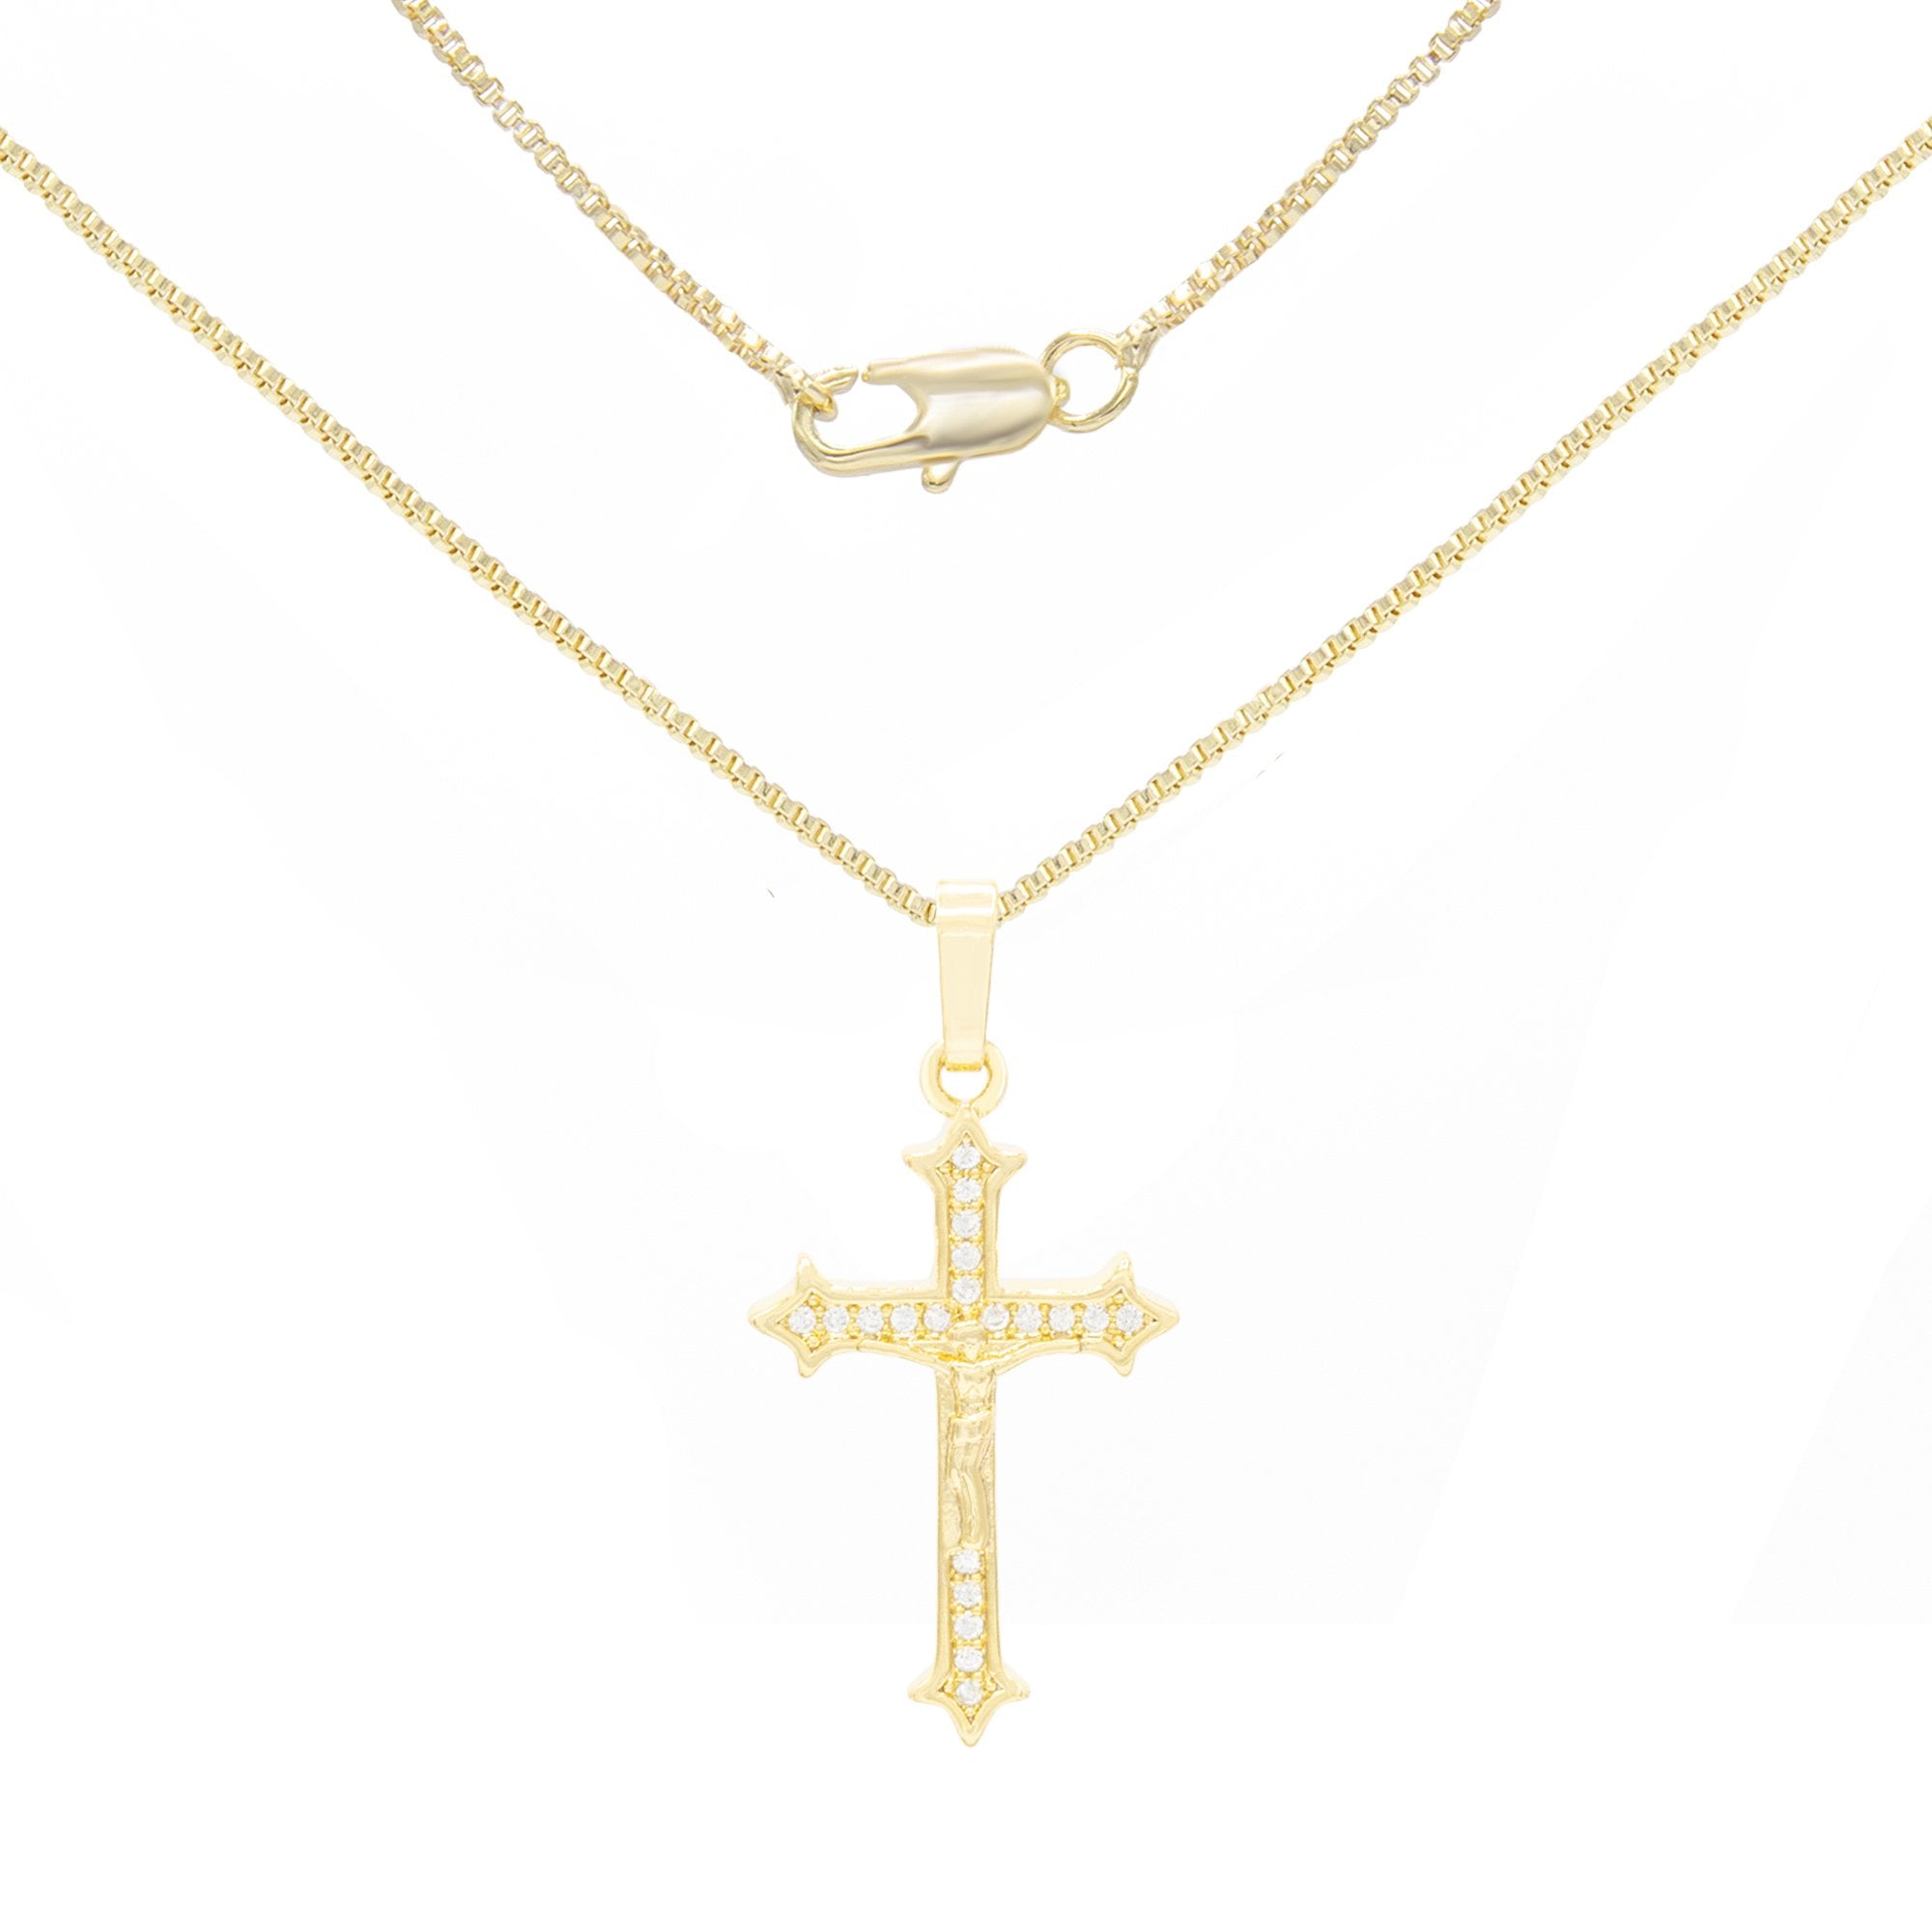 CZ Cross Cubic Zirconia Pendant With Necklace Set 14K Gold Filled